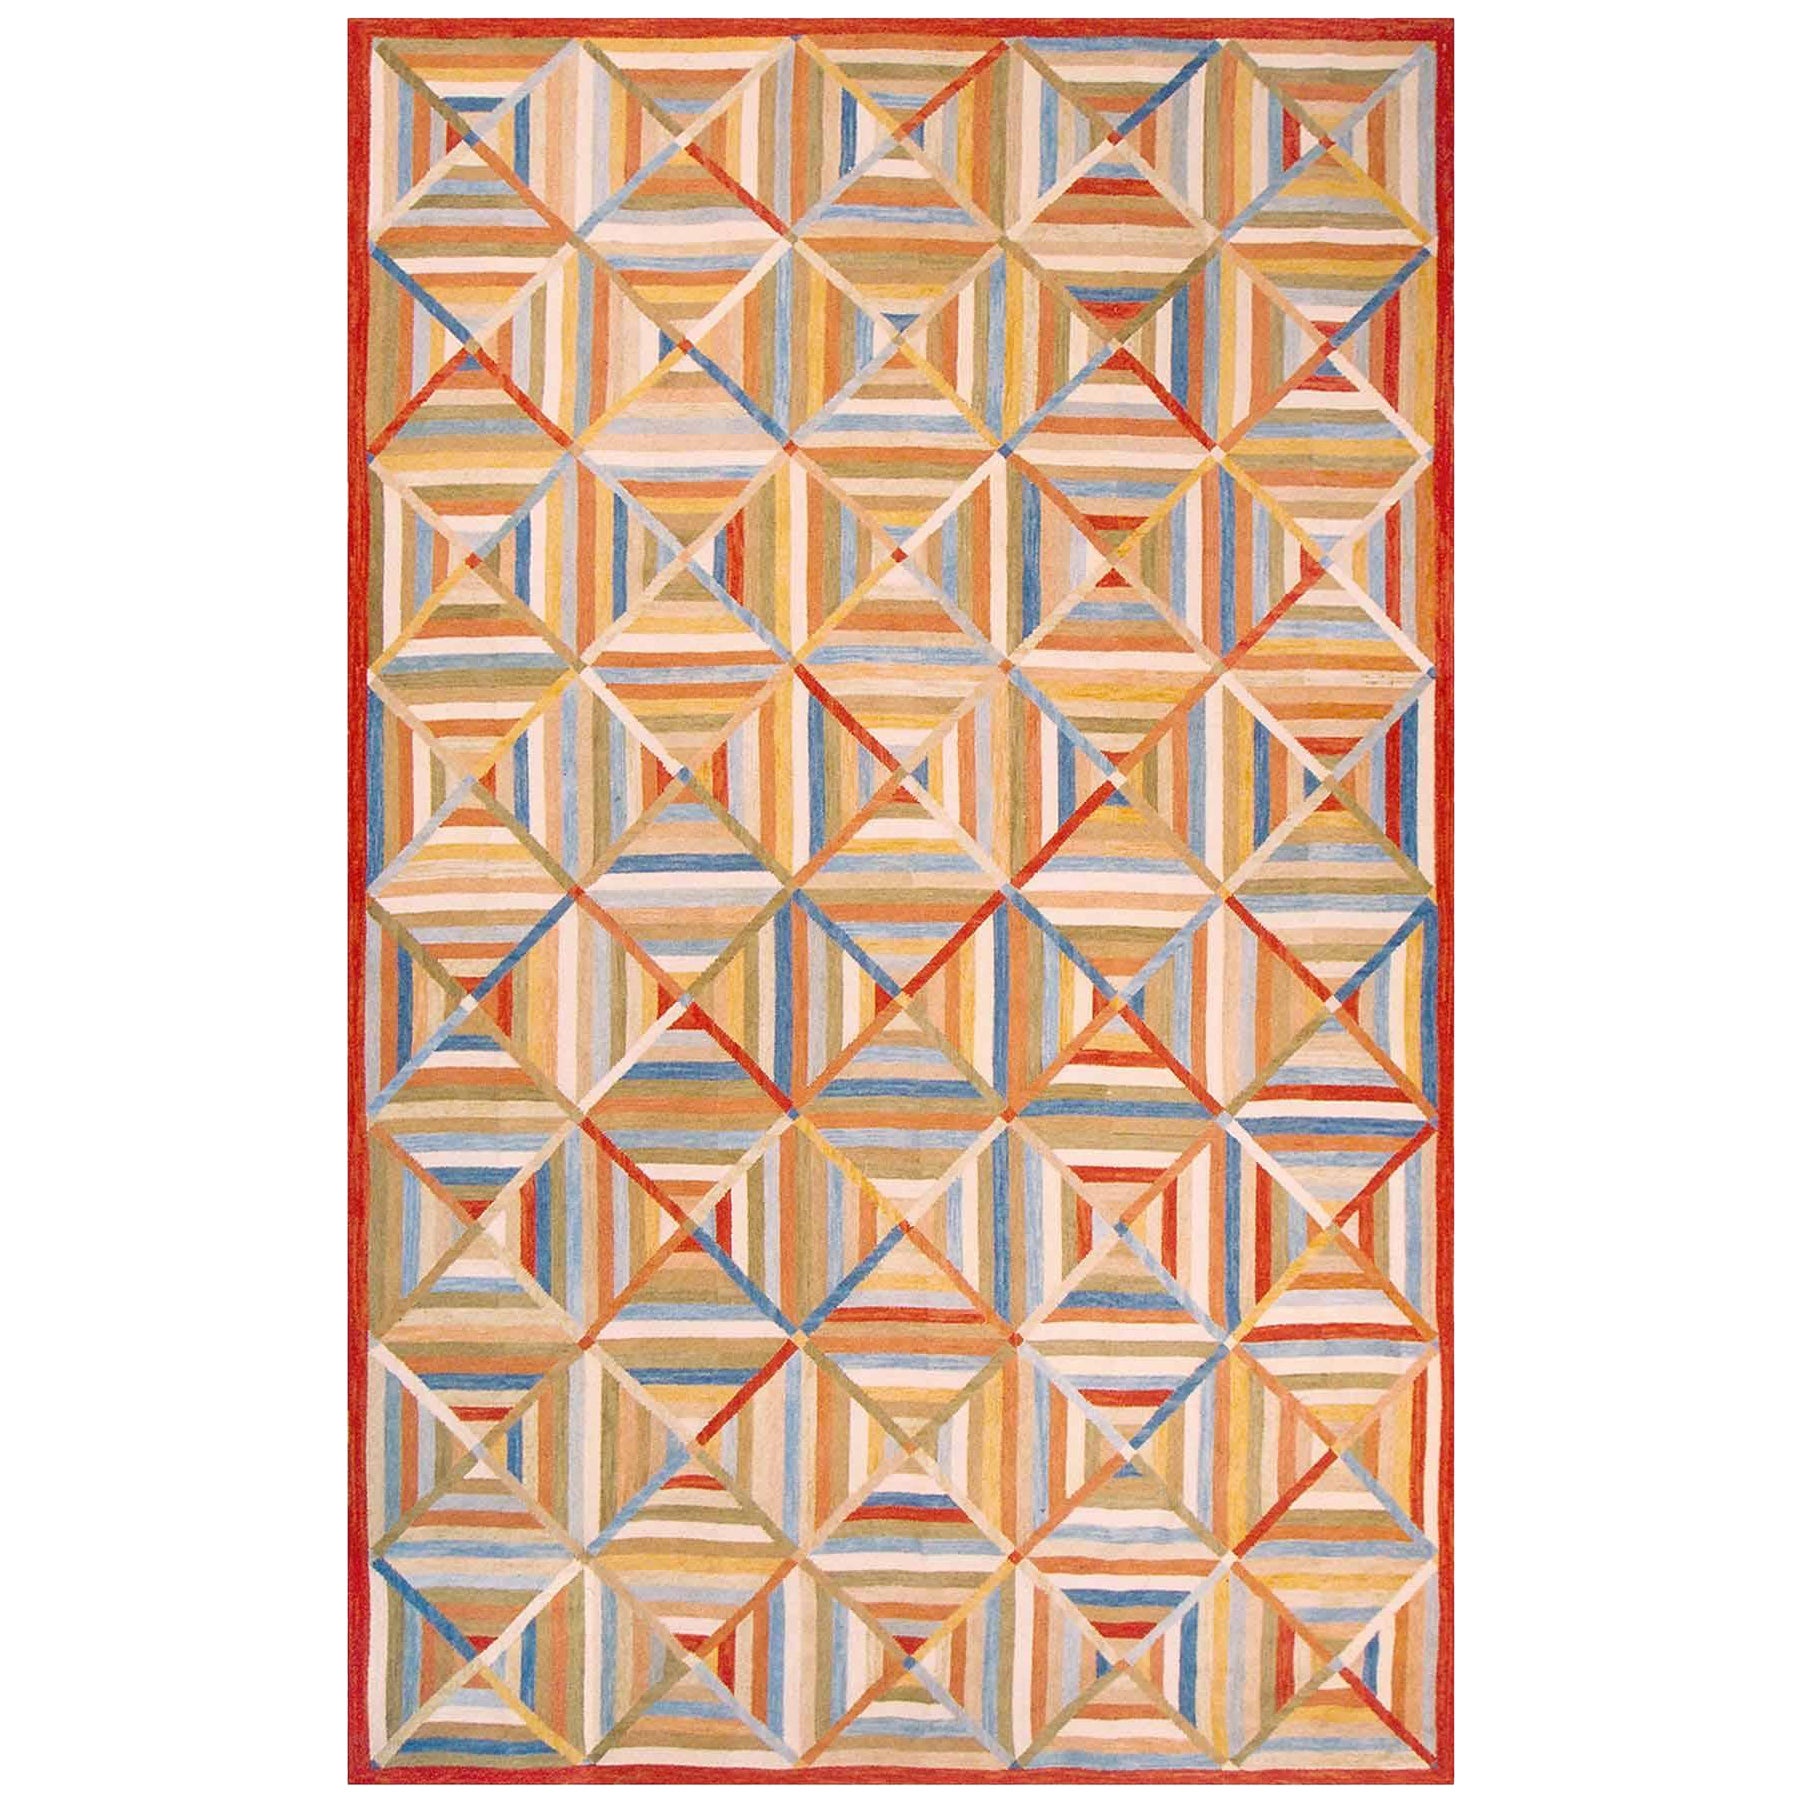 Contemporary American Hooked Rug 10' 0" x 14' 0" (305 x 427 cm)